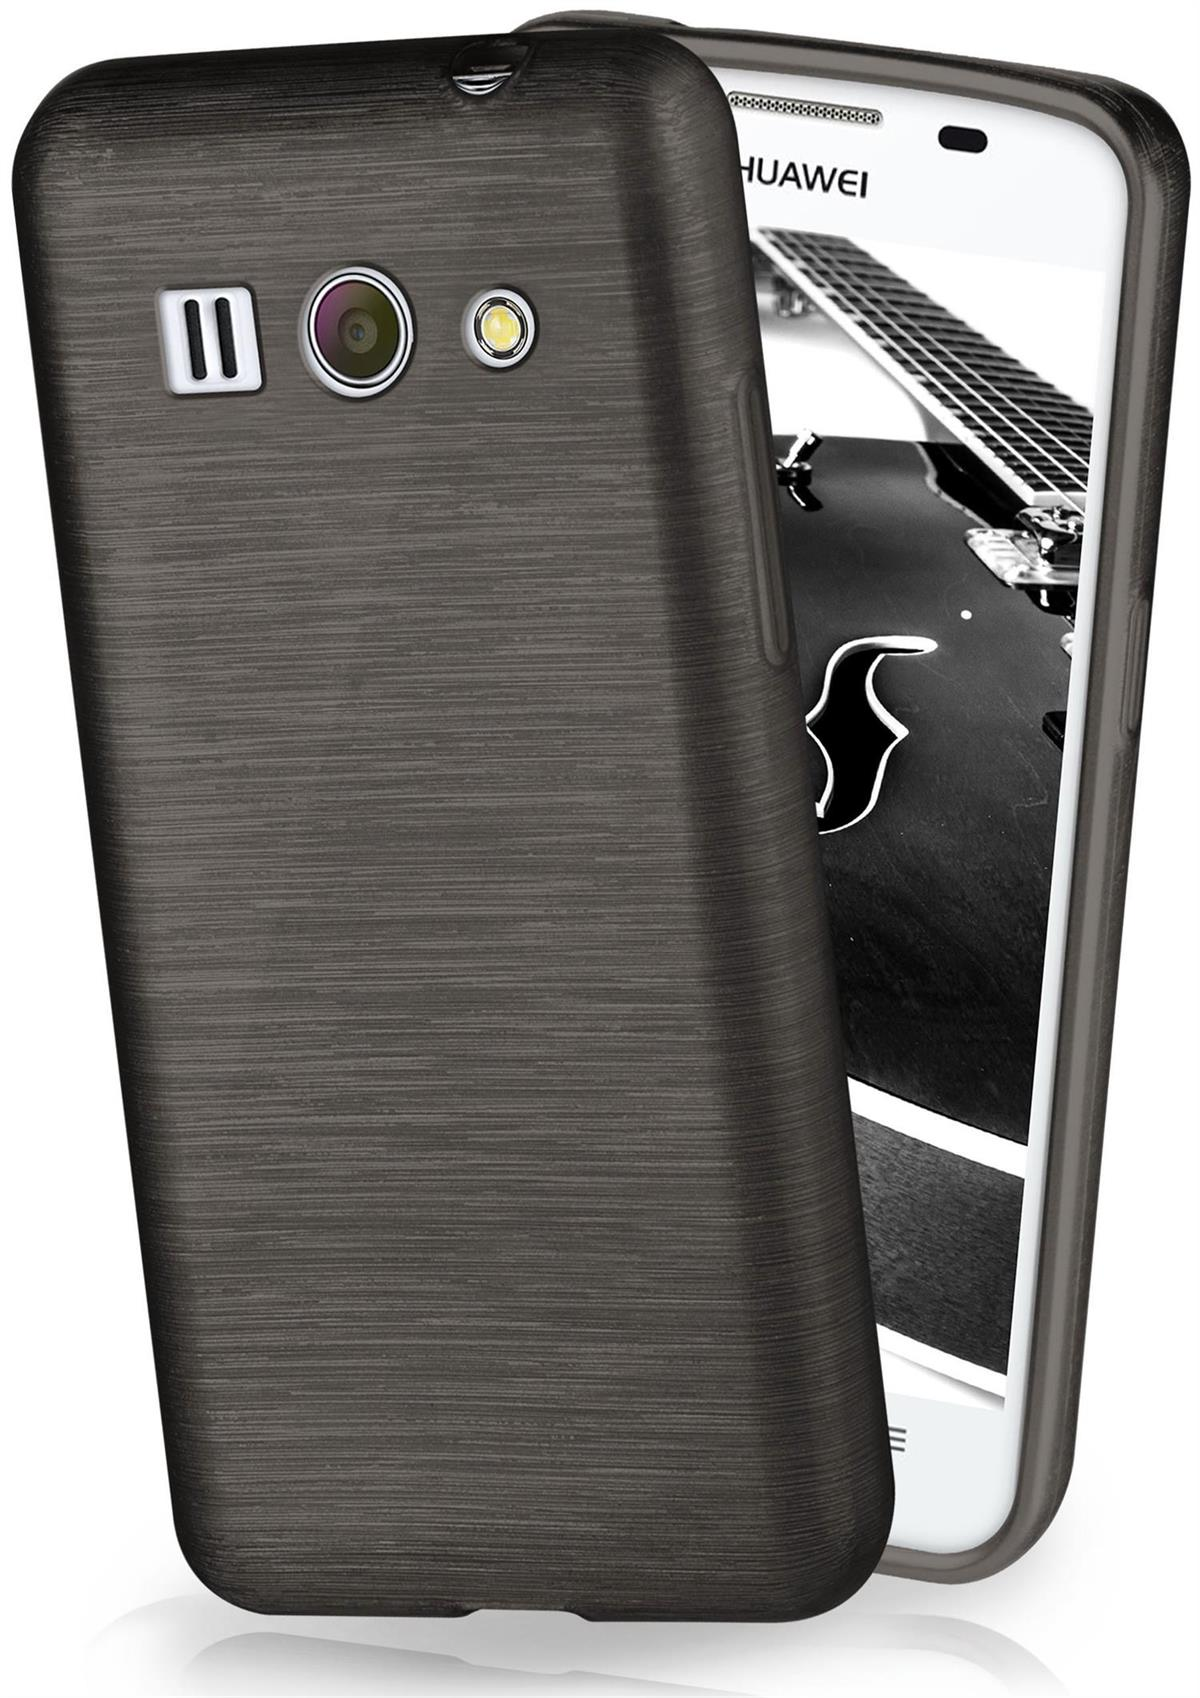 Onyx-Black Ascend Huawei, Brushed Case, MOEX G525, Backcover,